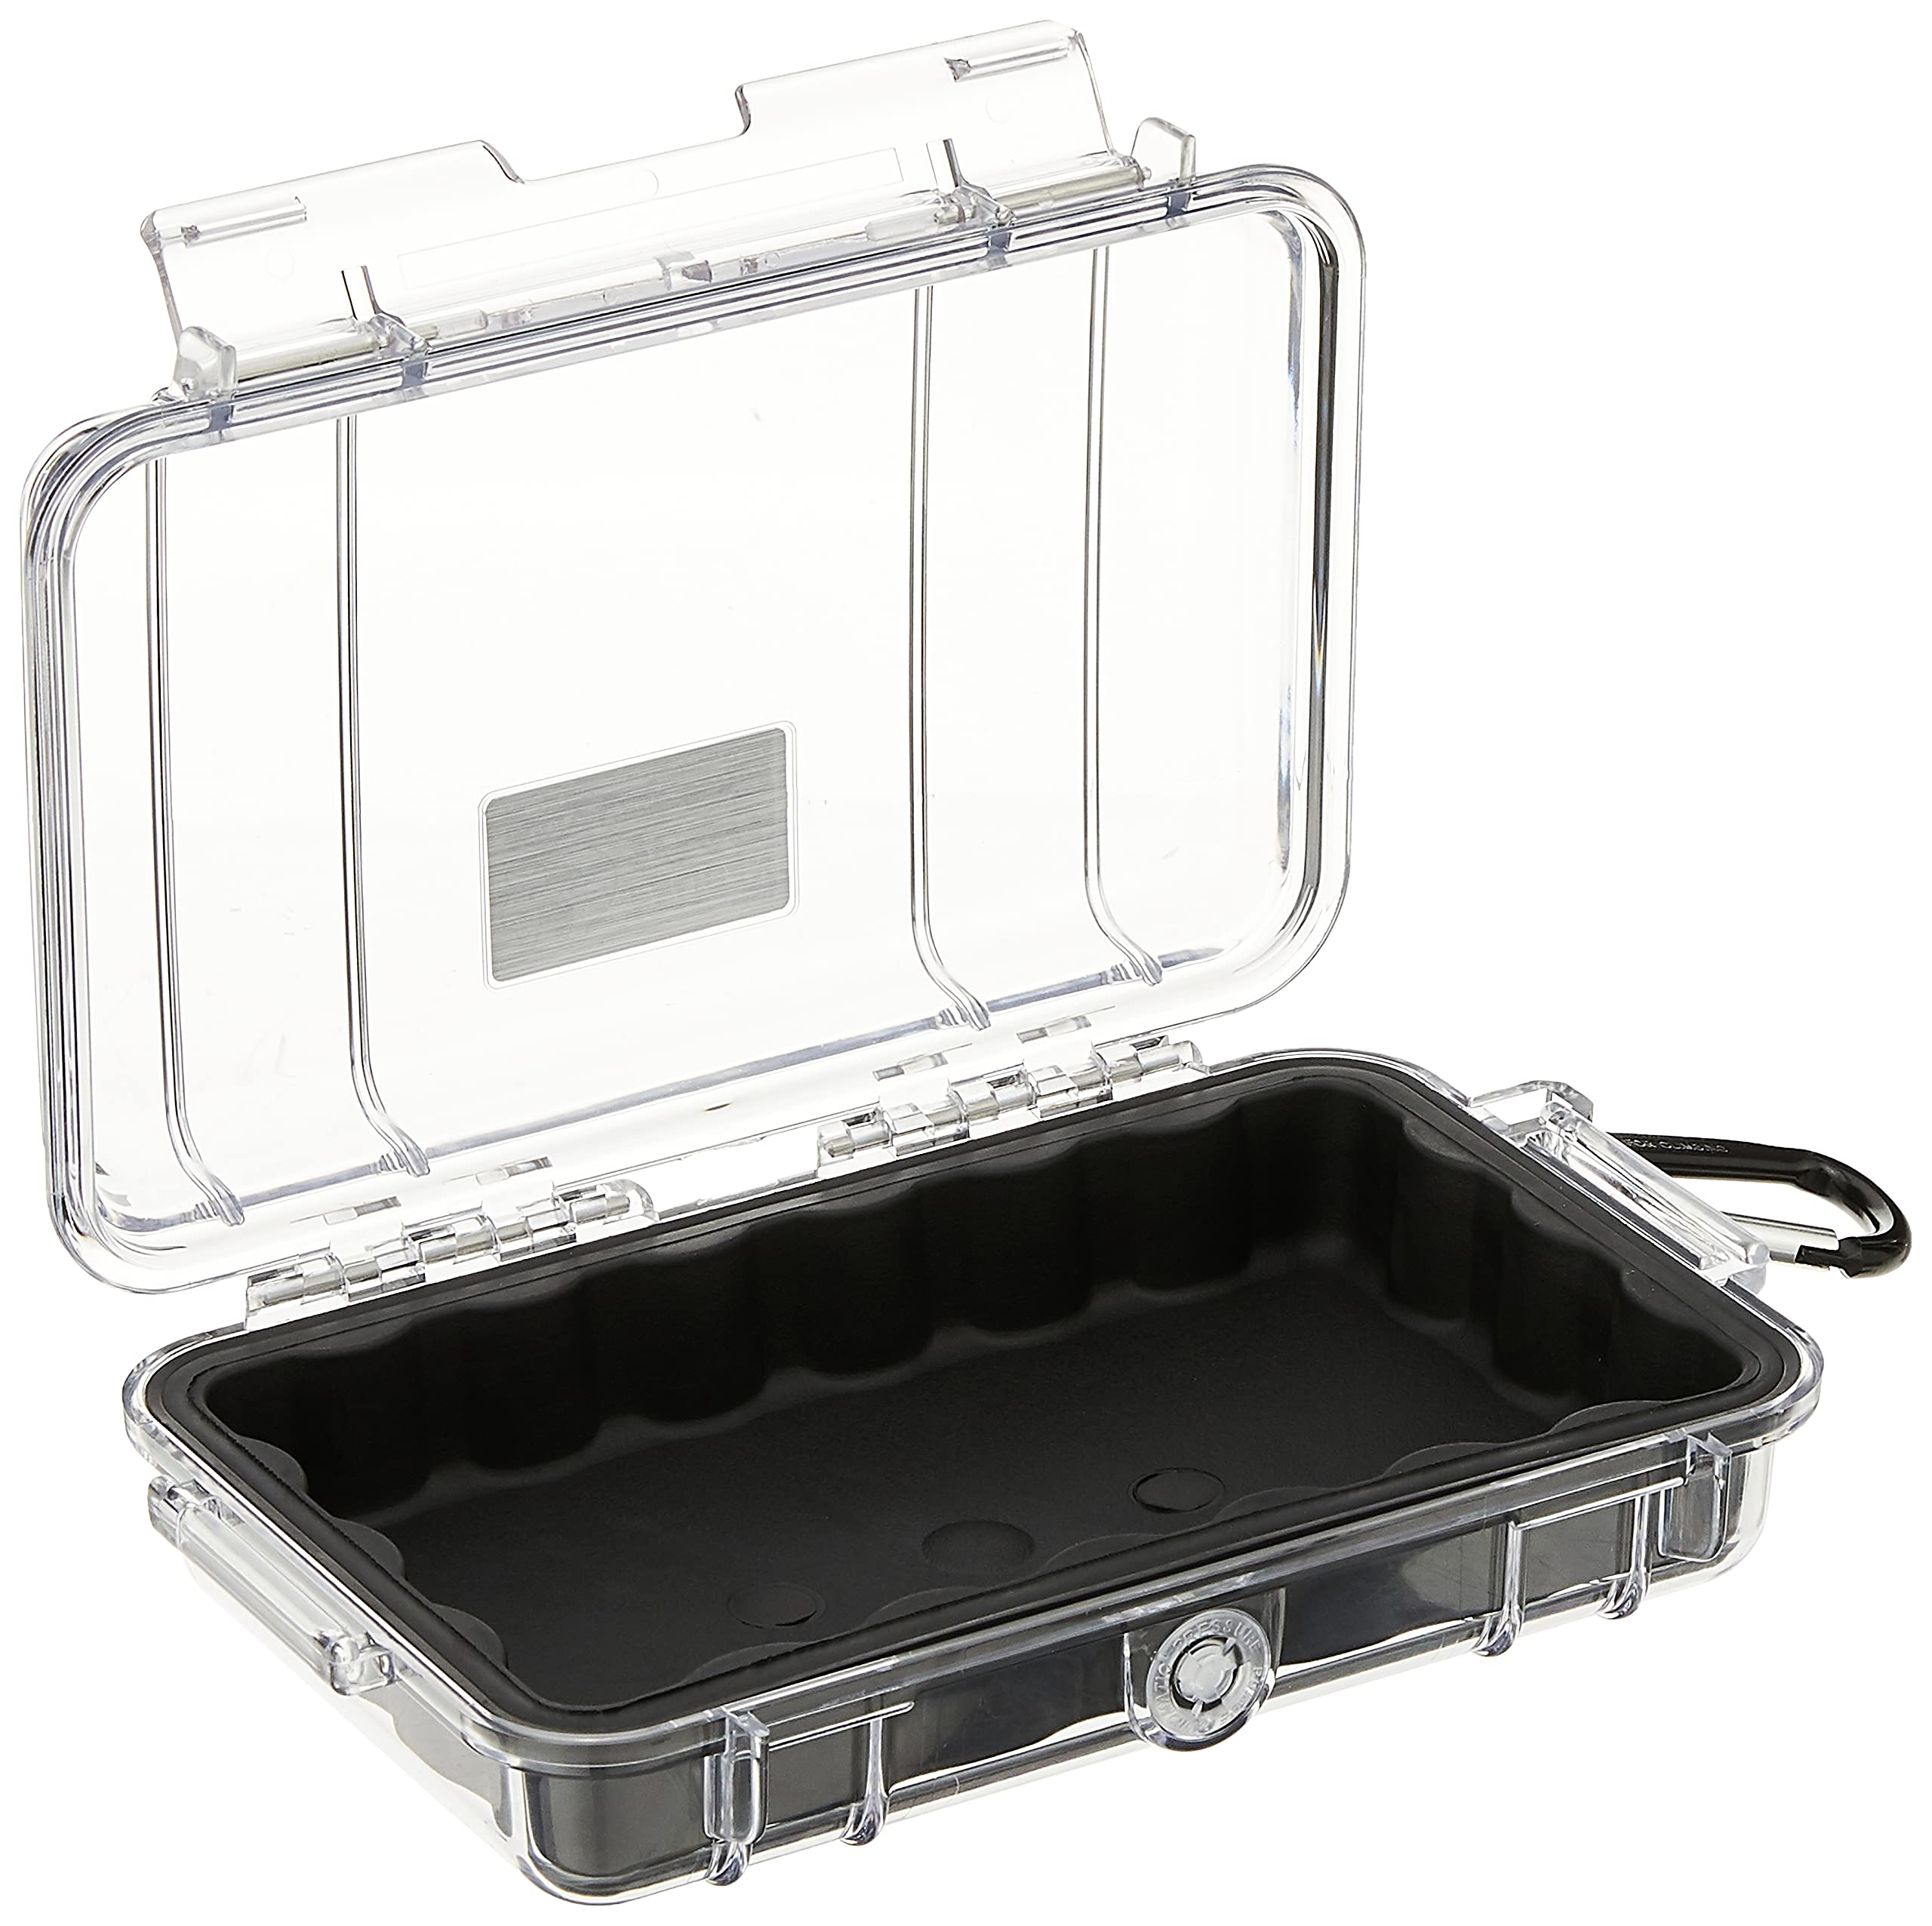 Pelican 1040 Micro Case, For iPhone 4, Water Resistant (Black/Clear), Model:1040-025-100